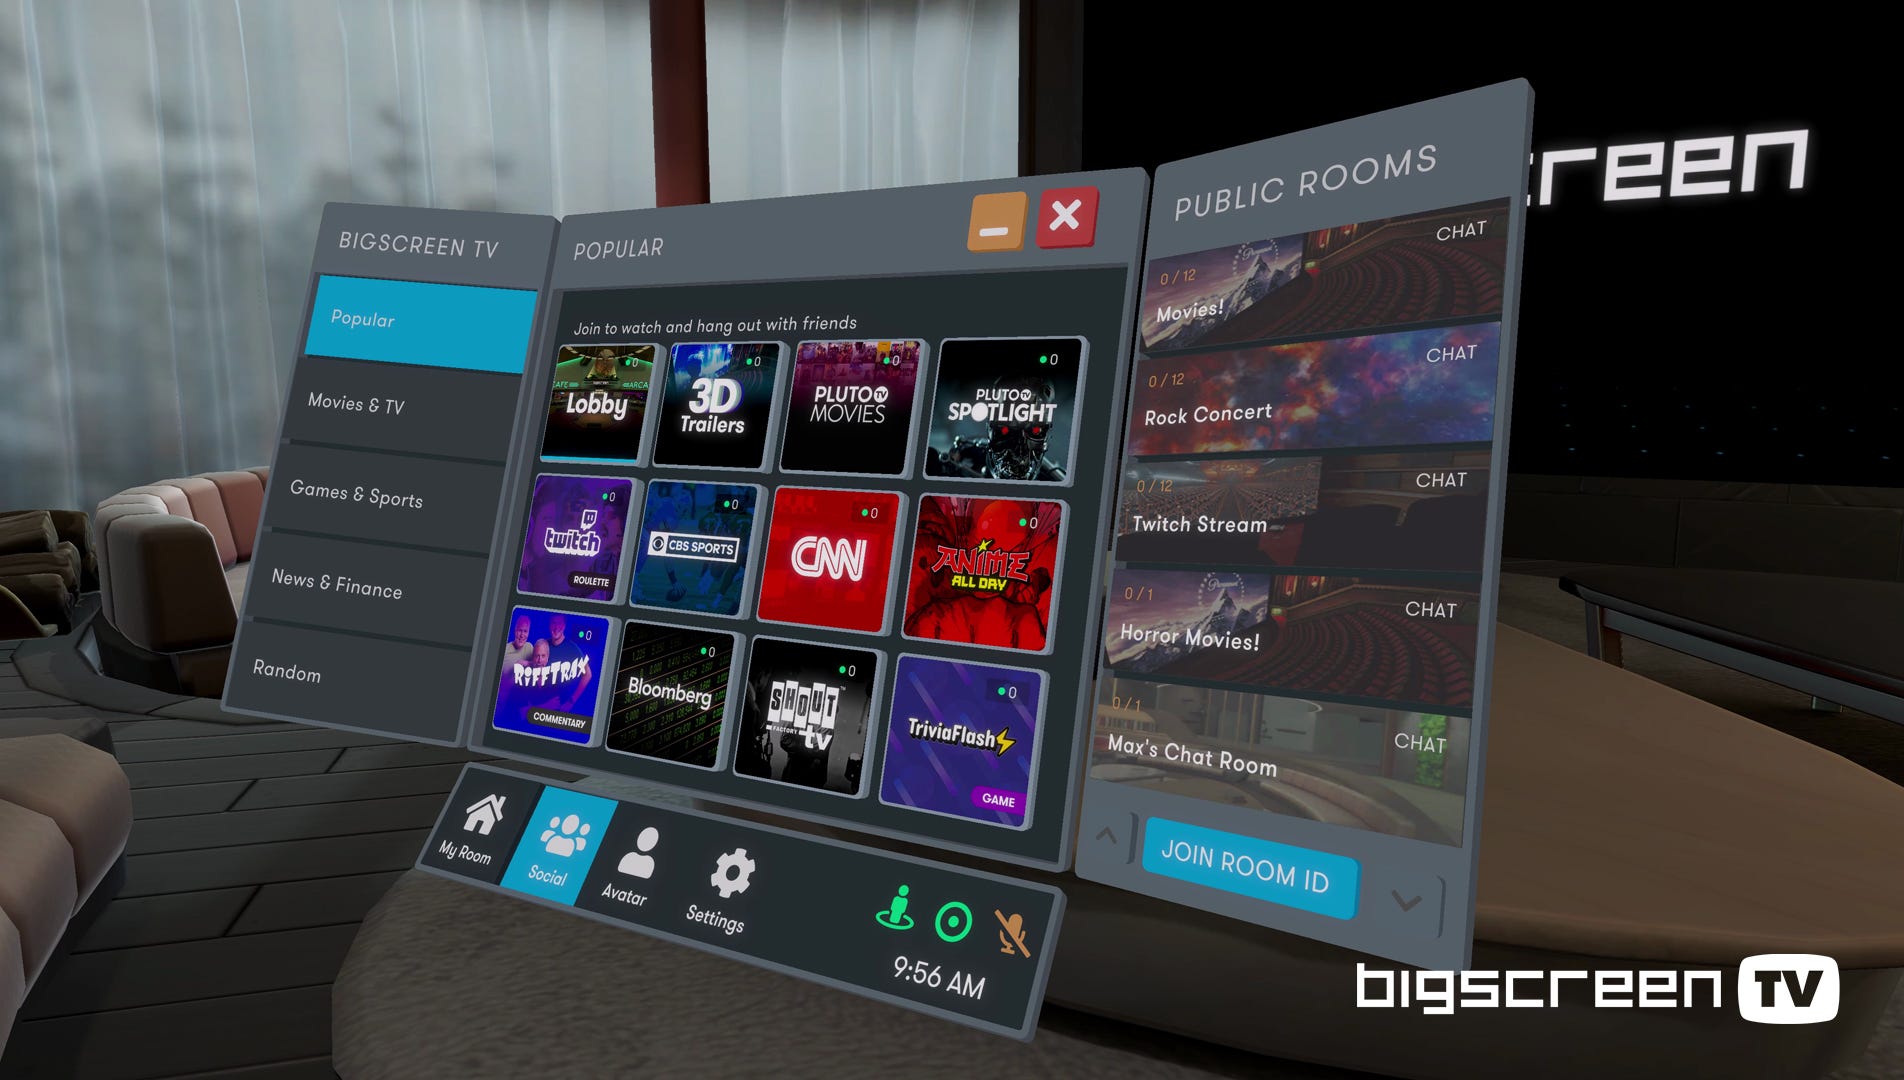 Introducing BIGSCREEN TV: watch movies, news, Twitch, sports, and 50+ channels with ...1904 x 1080